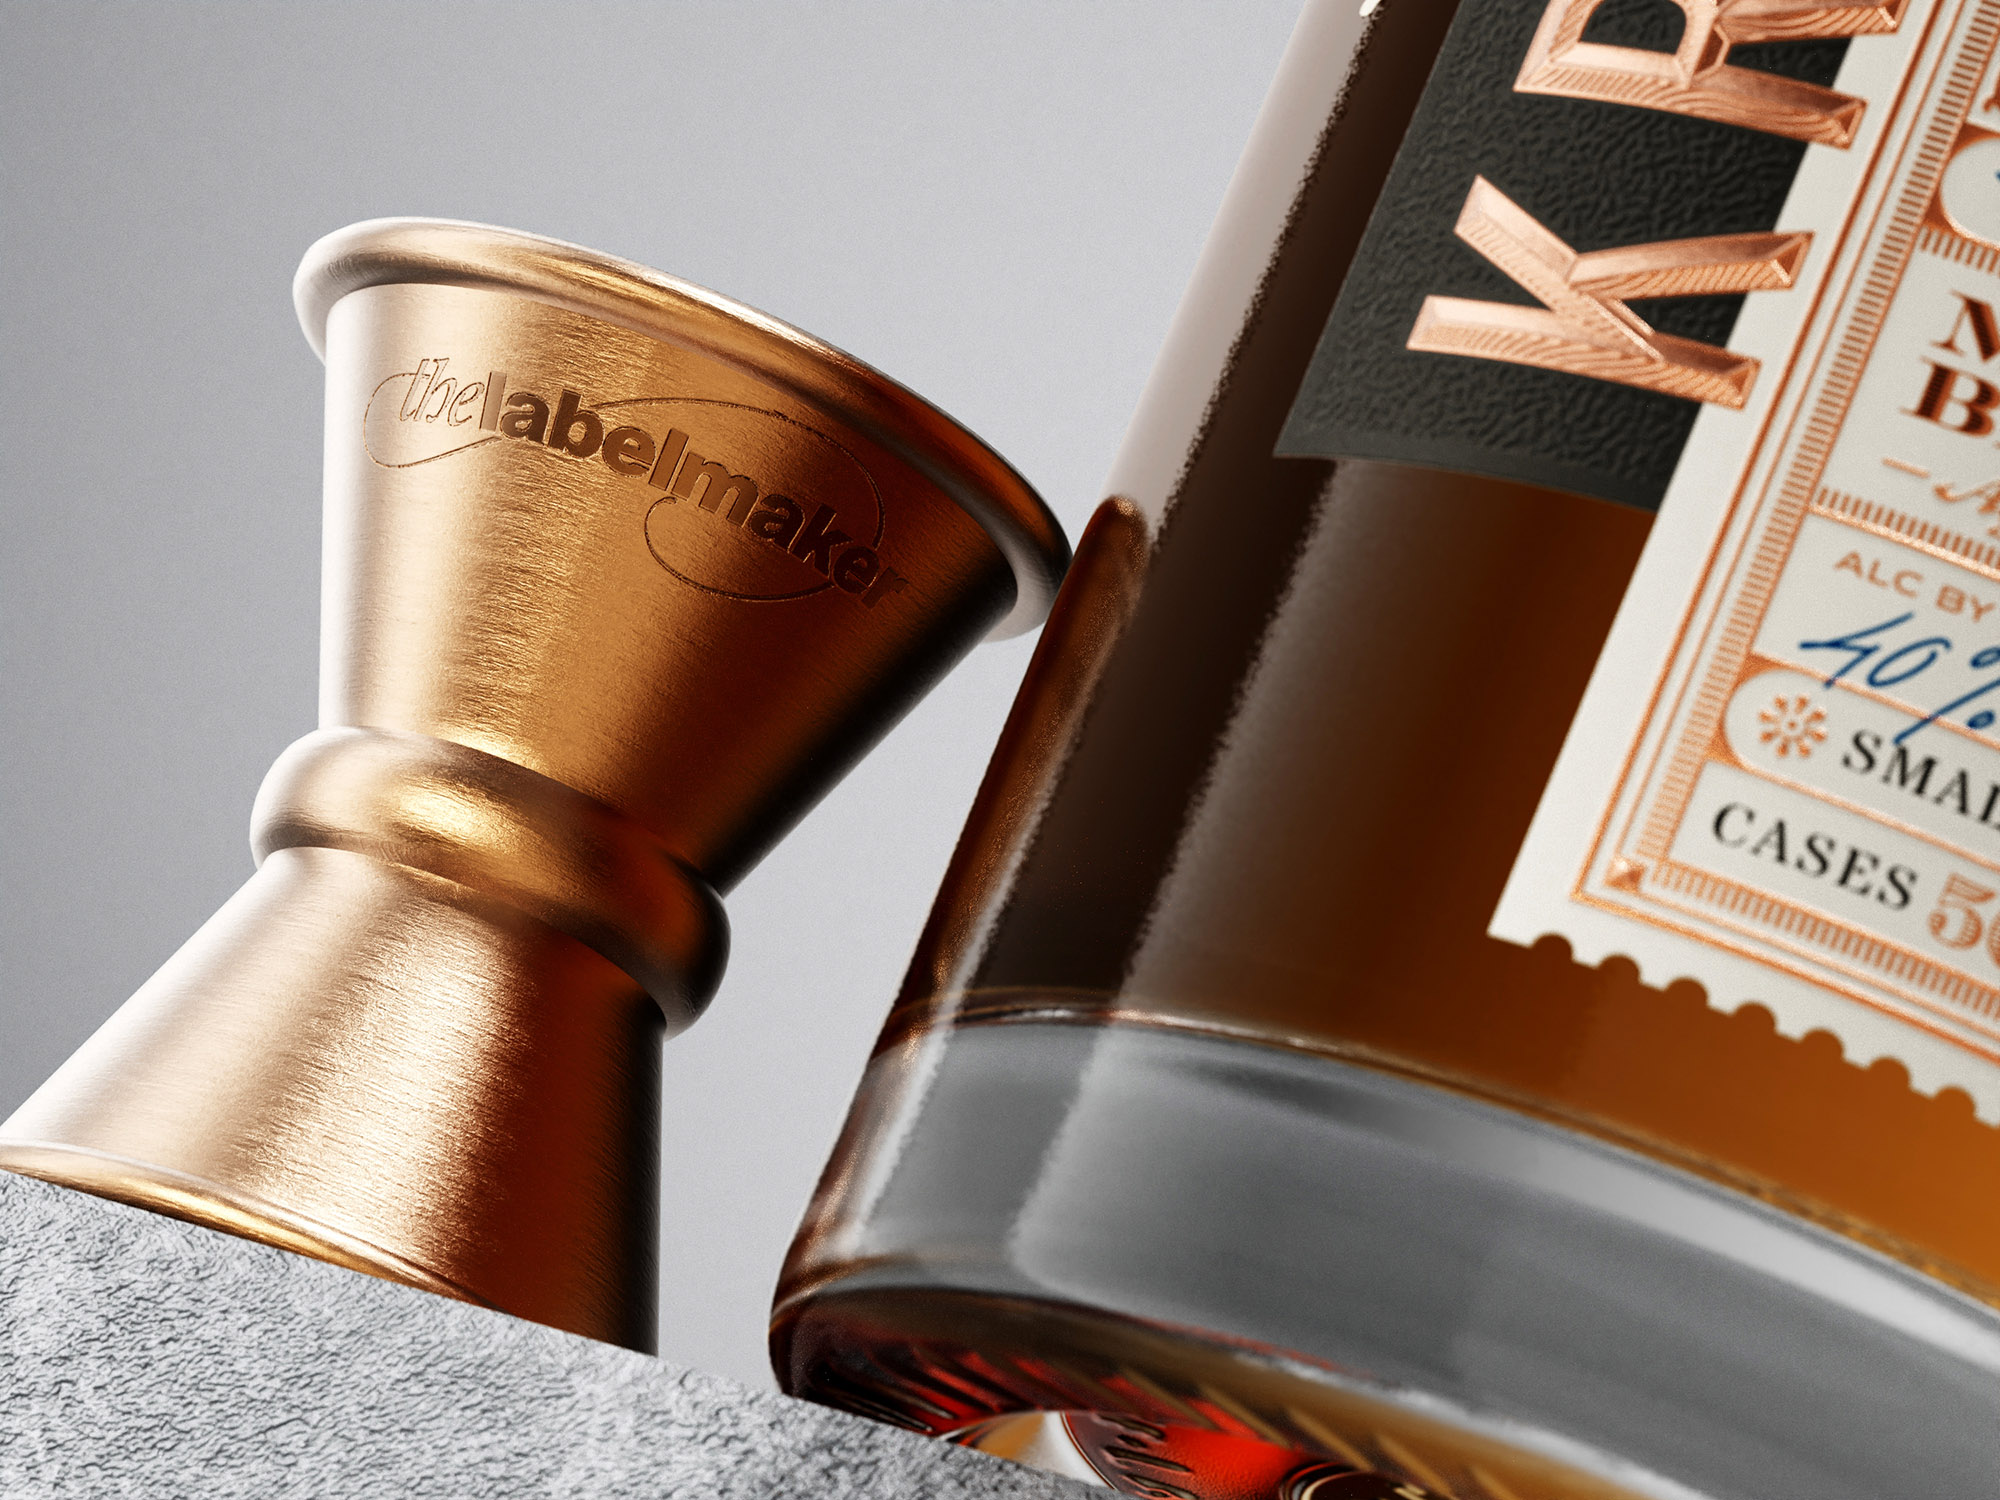 Crafting the Perfect Blend: The Artistry Behind Kristone Craft Grape Brandy Label Design